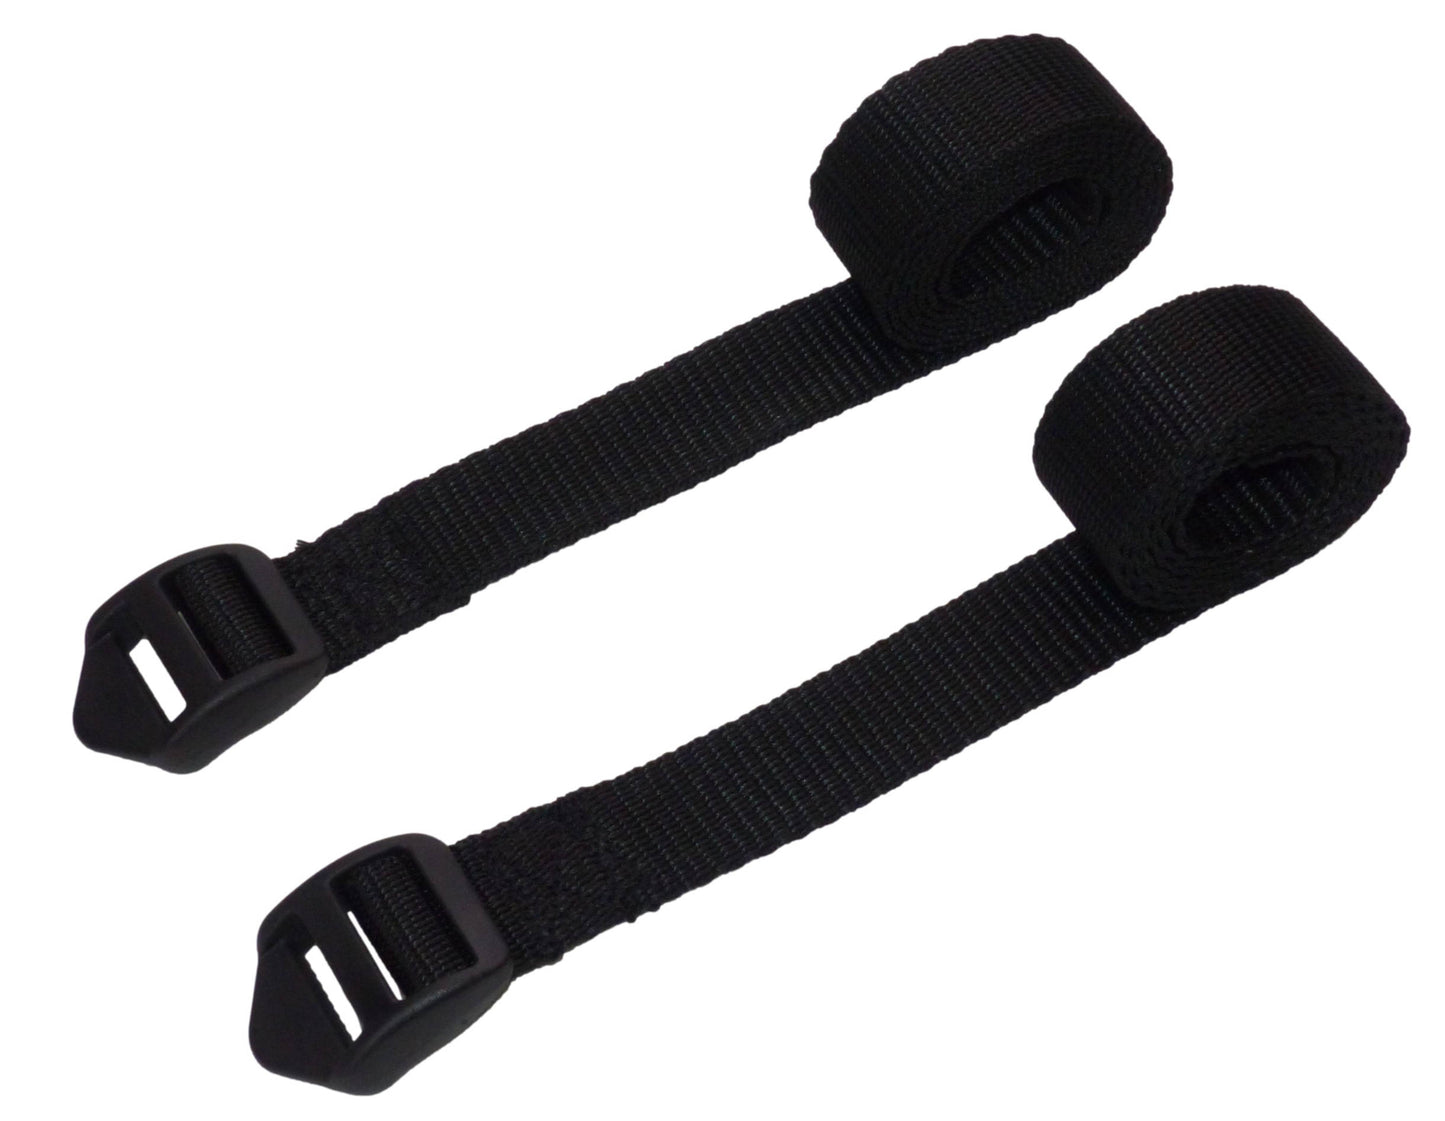 The Benristraps 25mm Camping Straps, 150cm (pair) in black